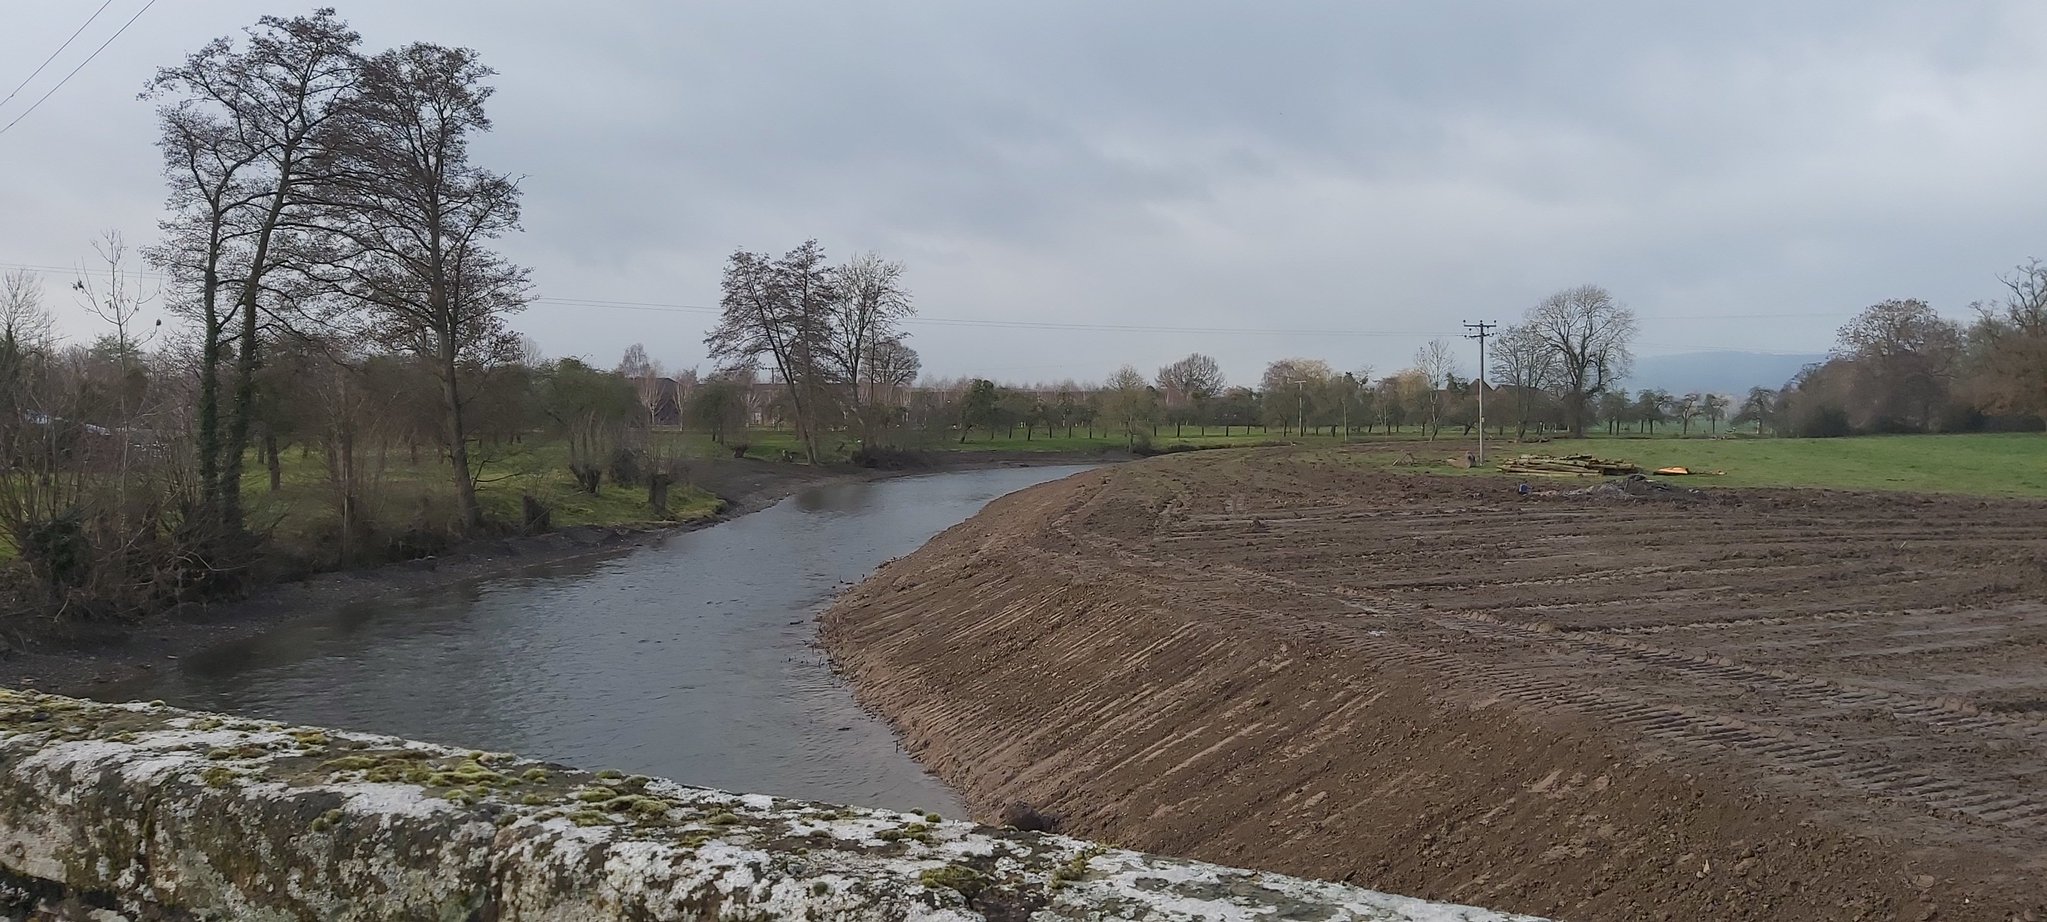 NEWS | River Lugg: Government issues press release